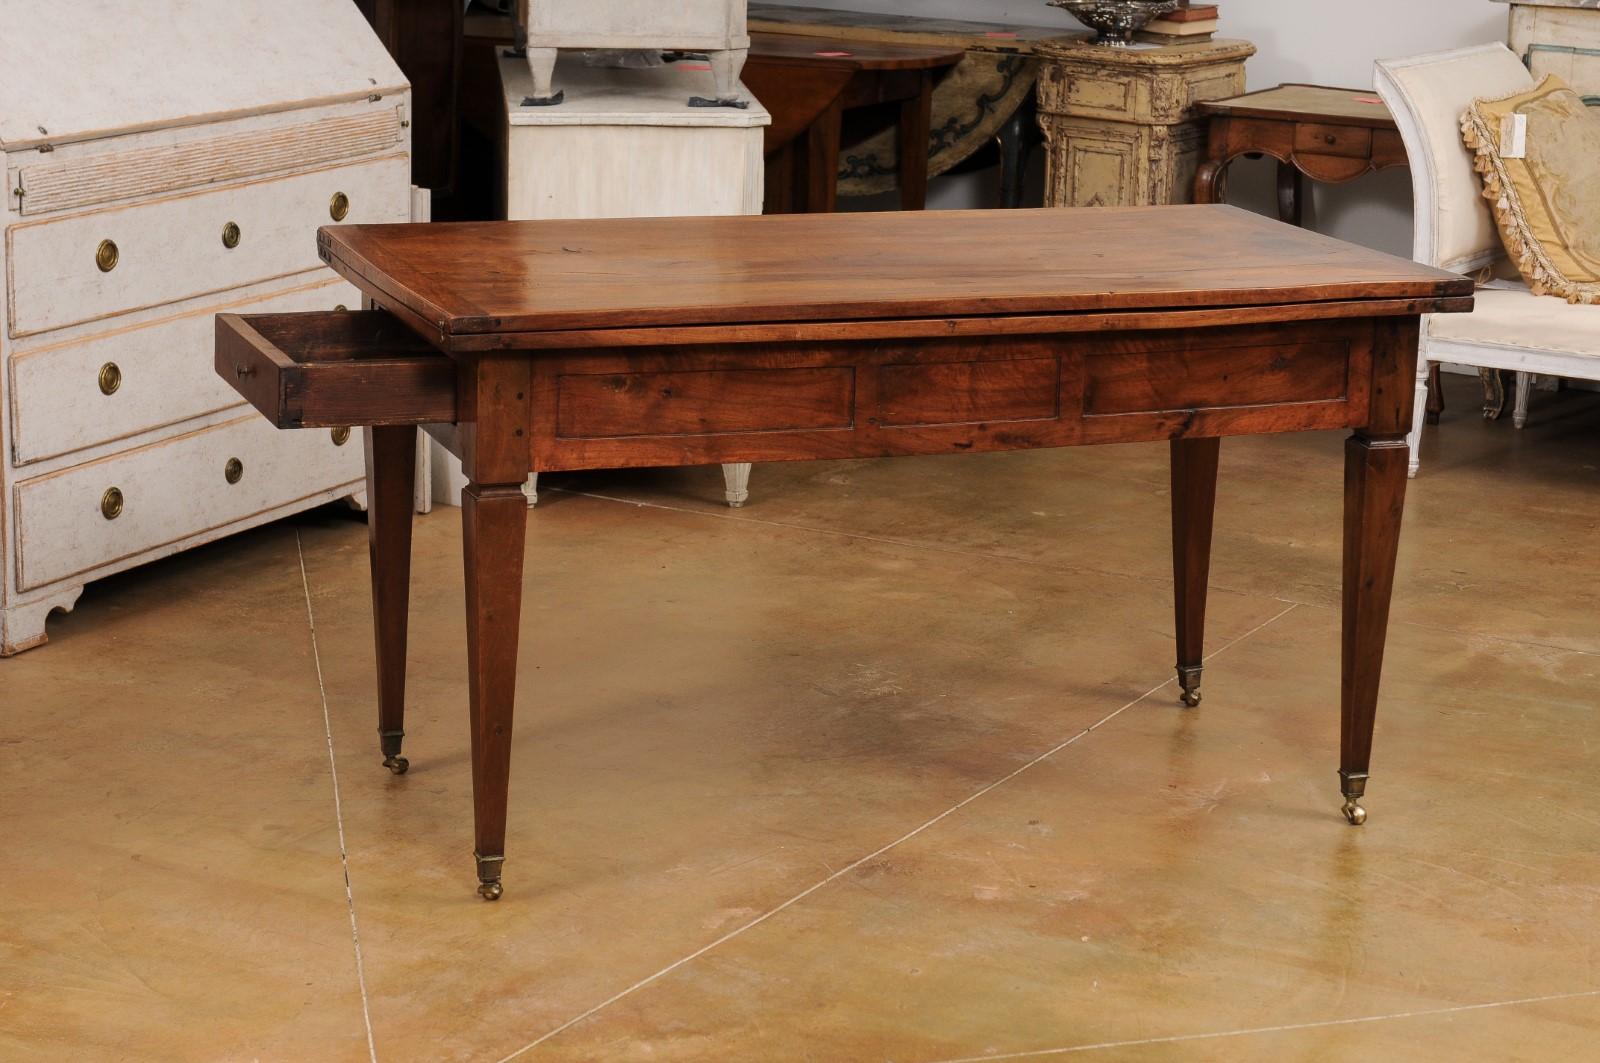 French Directoire Style 19th Century Walnut Table with Folding Top, Tapered Legs In Good Condition For Sale In Atlanta, GA